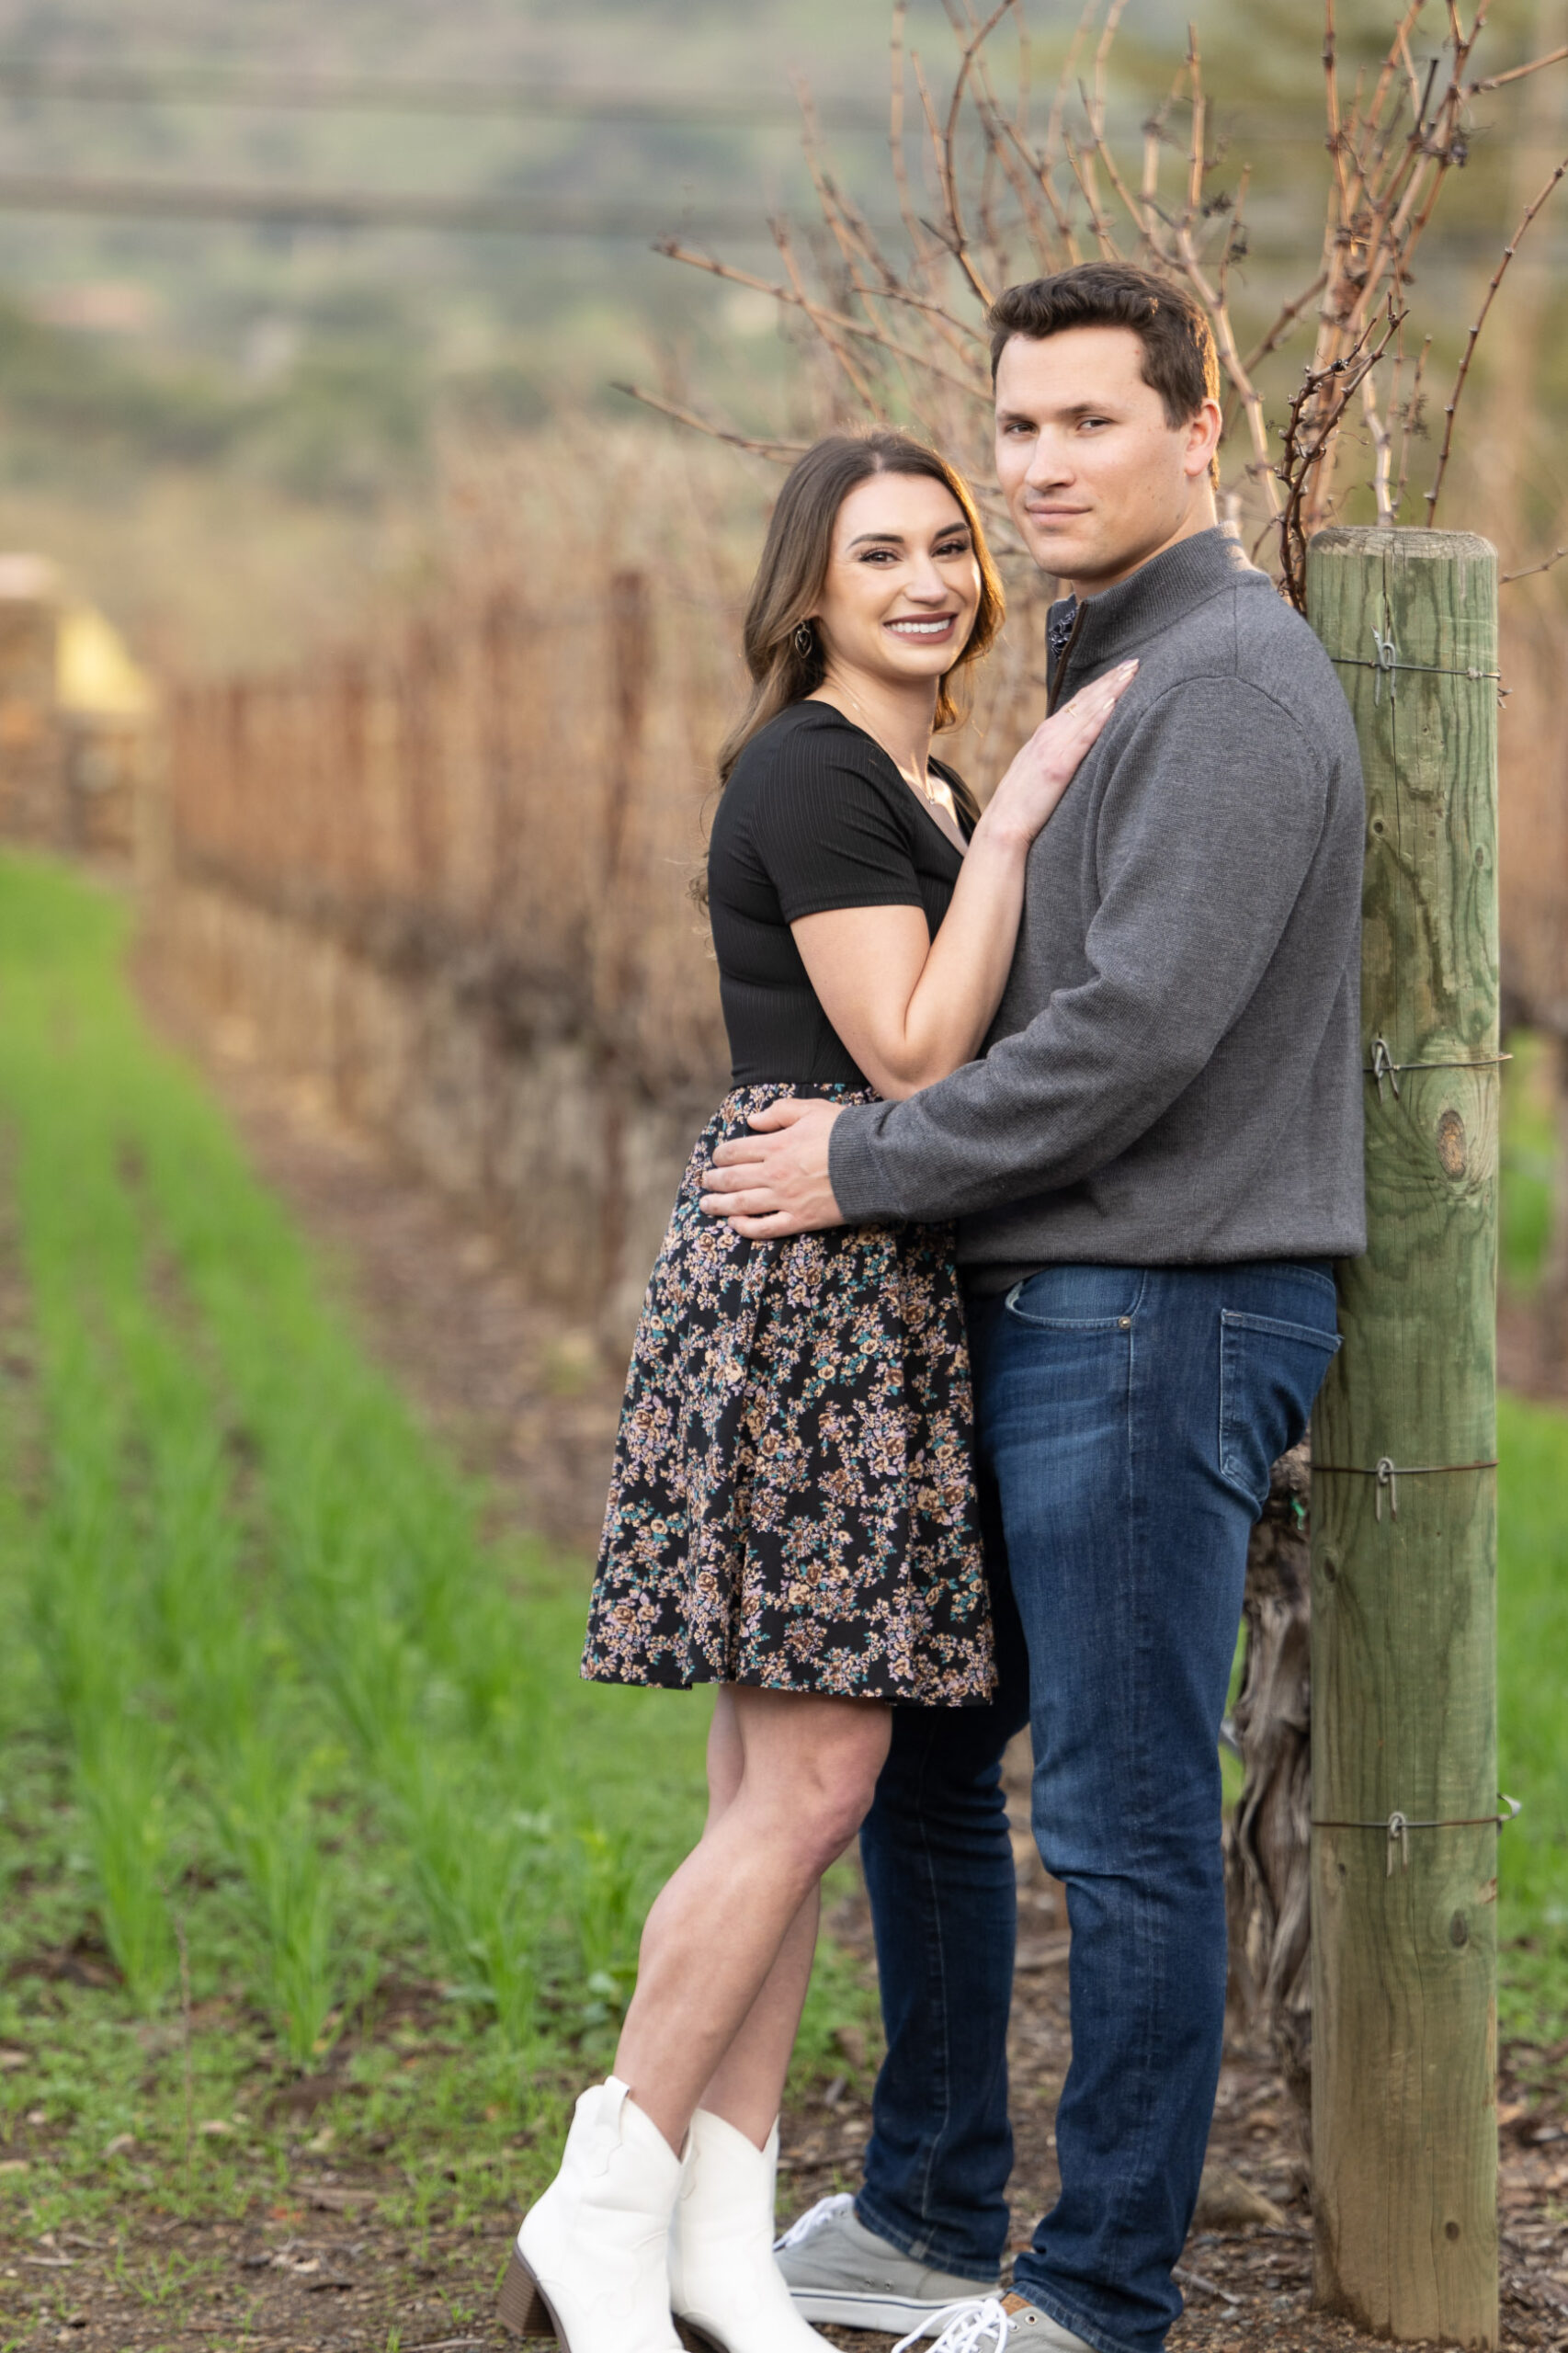 A couple stands closely together in a vineyard. The woman wears a black top and floral skirt, while the man is dressed in a gray jacket and jeans. They are outdoors with rows of grapevines behind them.